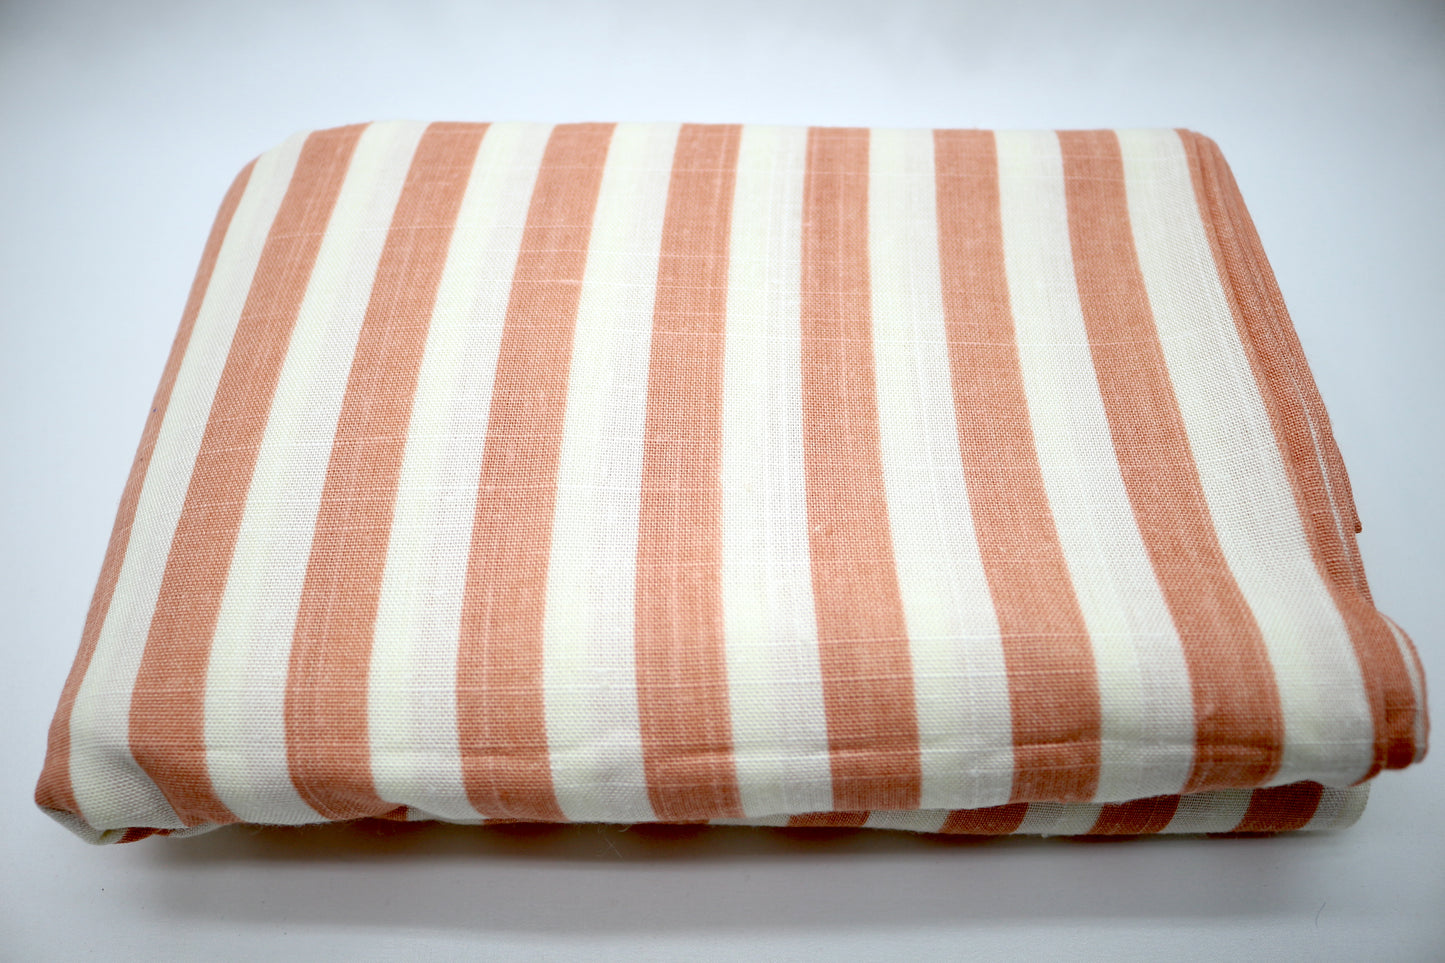 Farm Stand Peaches Cotton Woven Fabric 45" x 4 yds